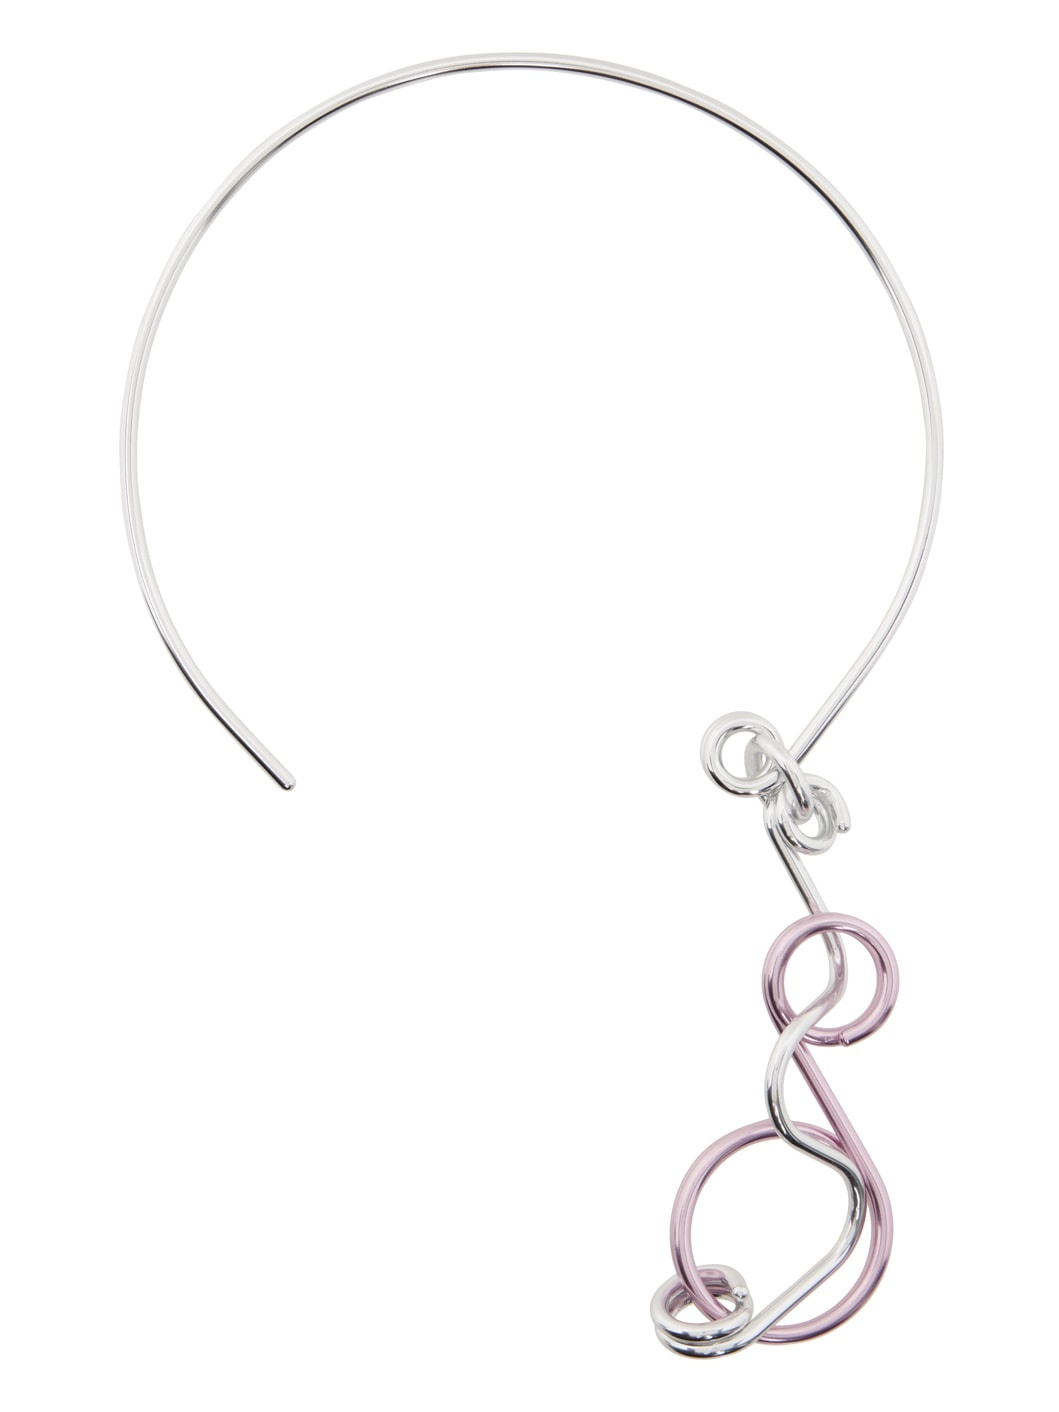 Silver & Pink Bubble Wands Necklace - 1